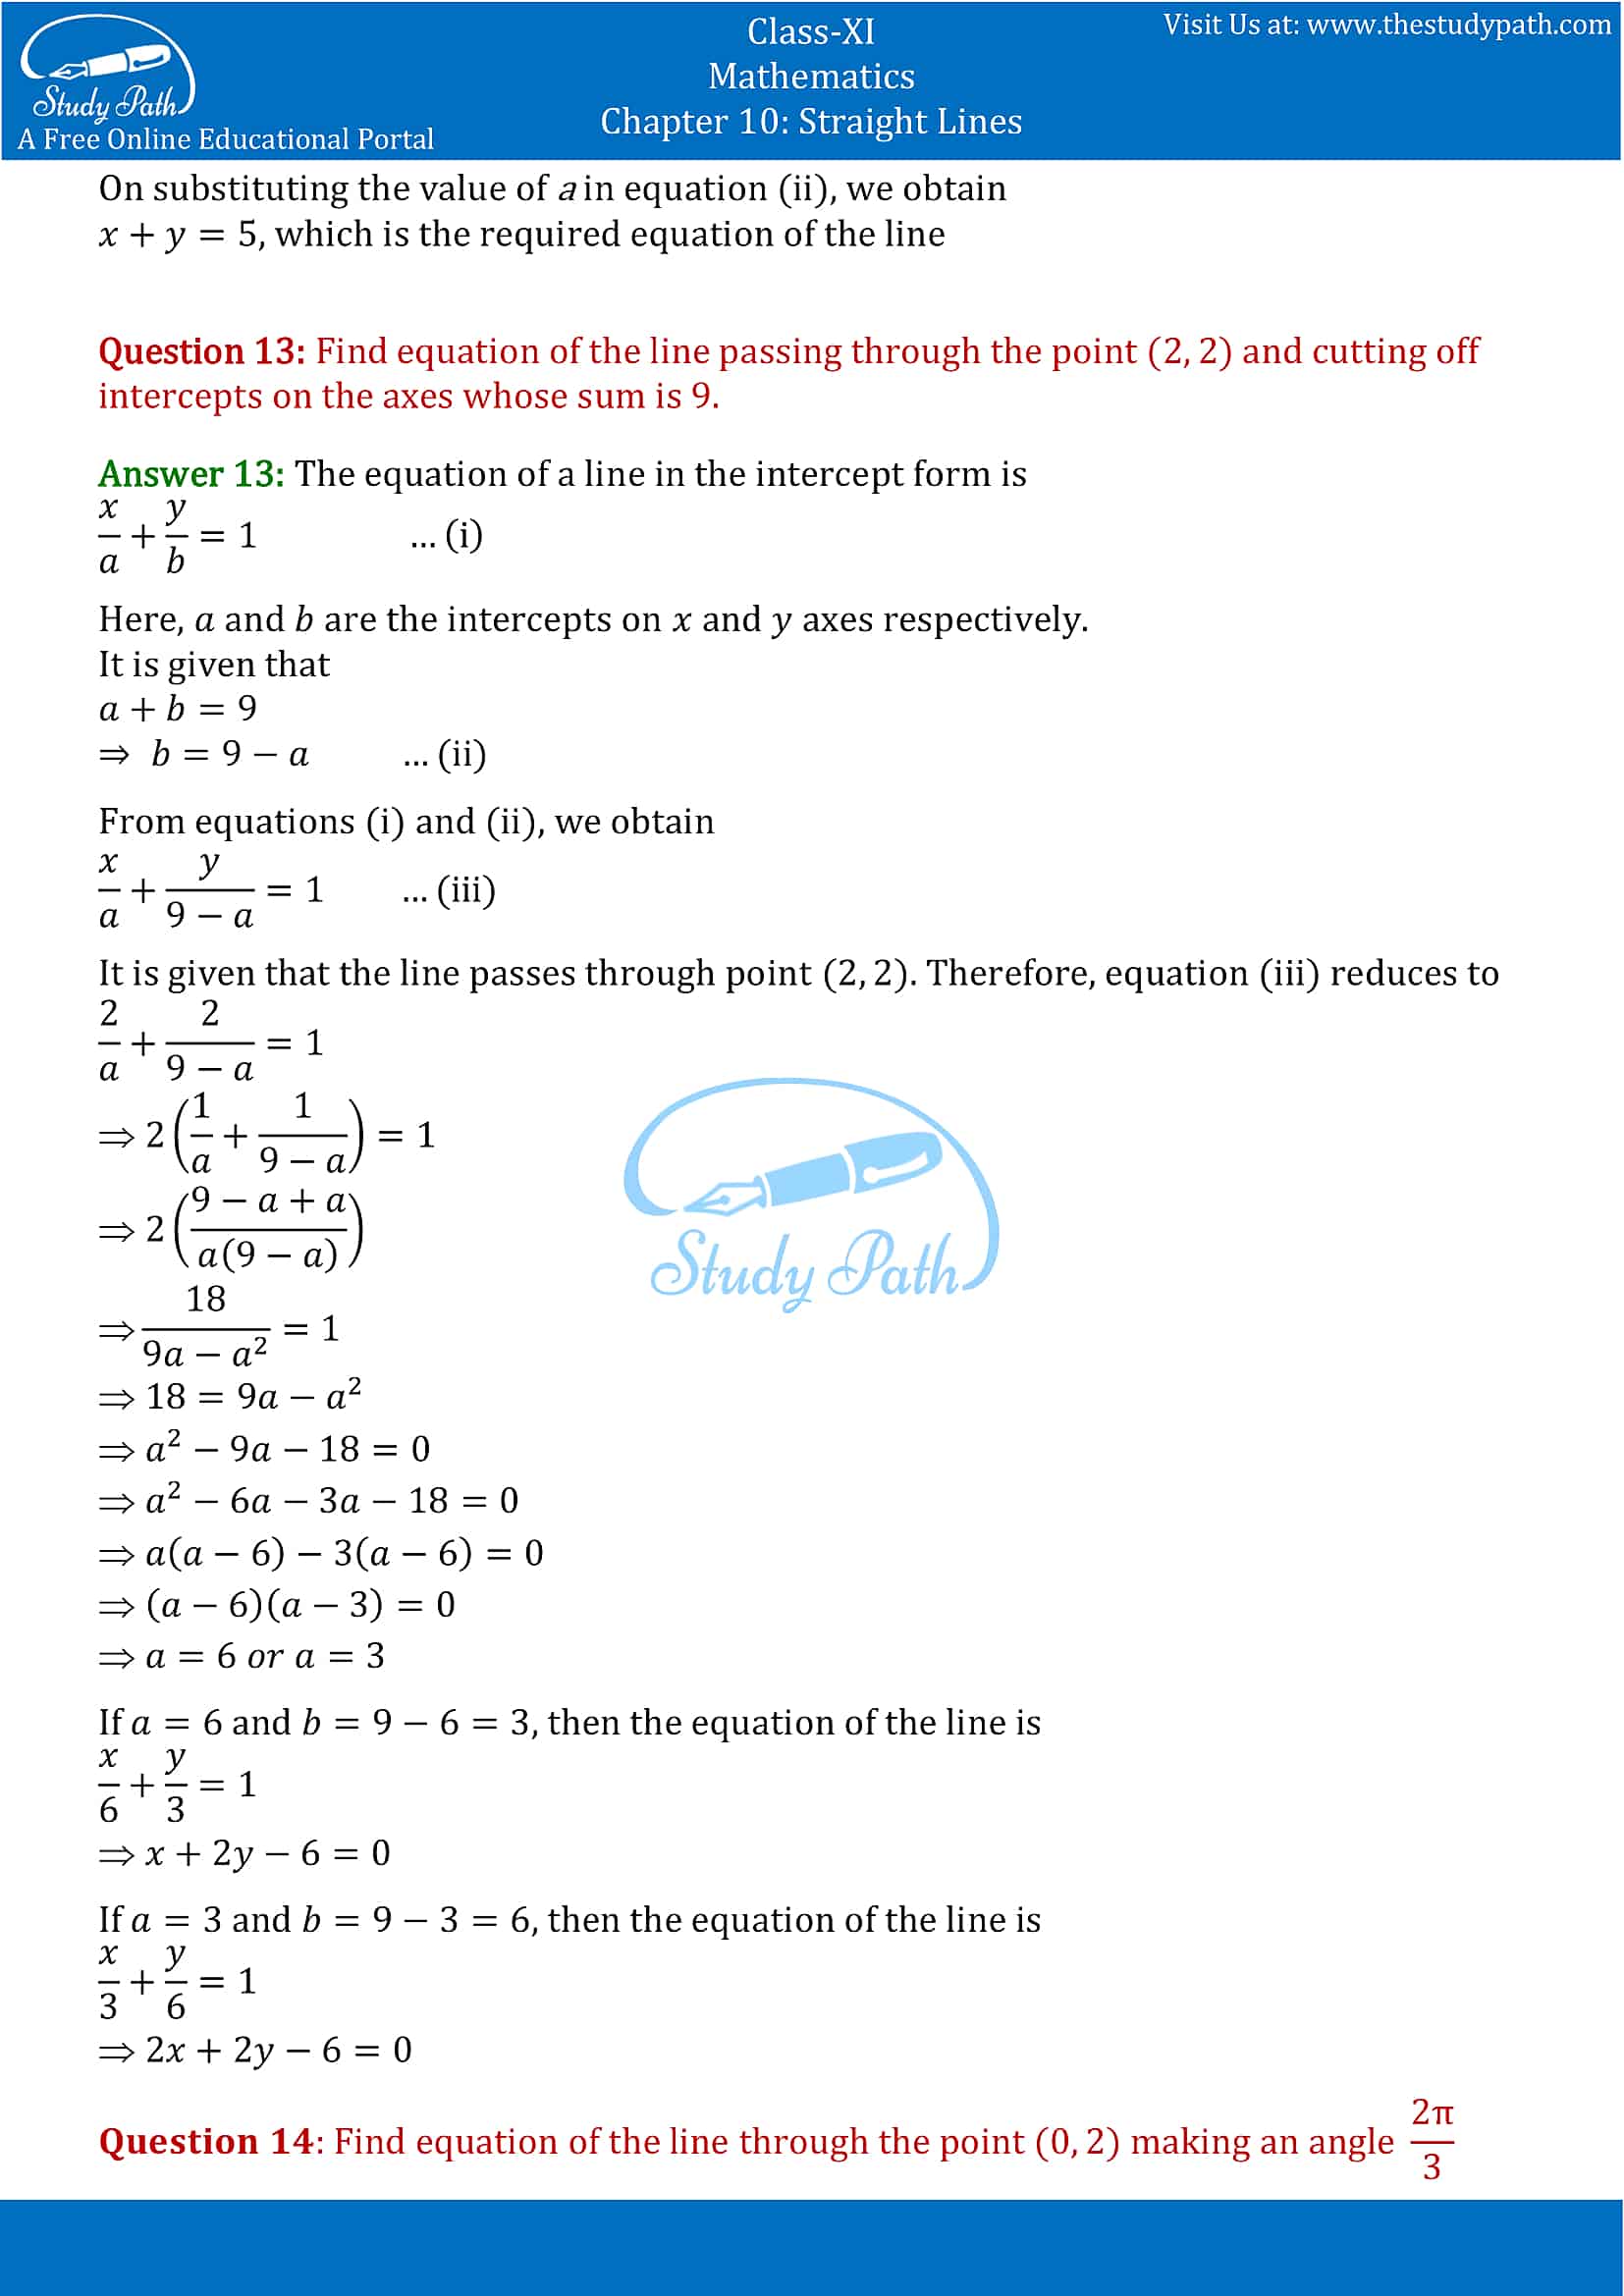 NCERT Solutions for Class 11 Maths chapter 10 Straight Lines Exercise 10.2 Part-6